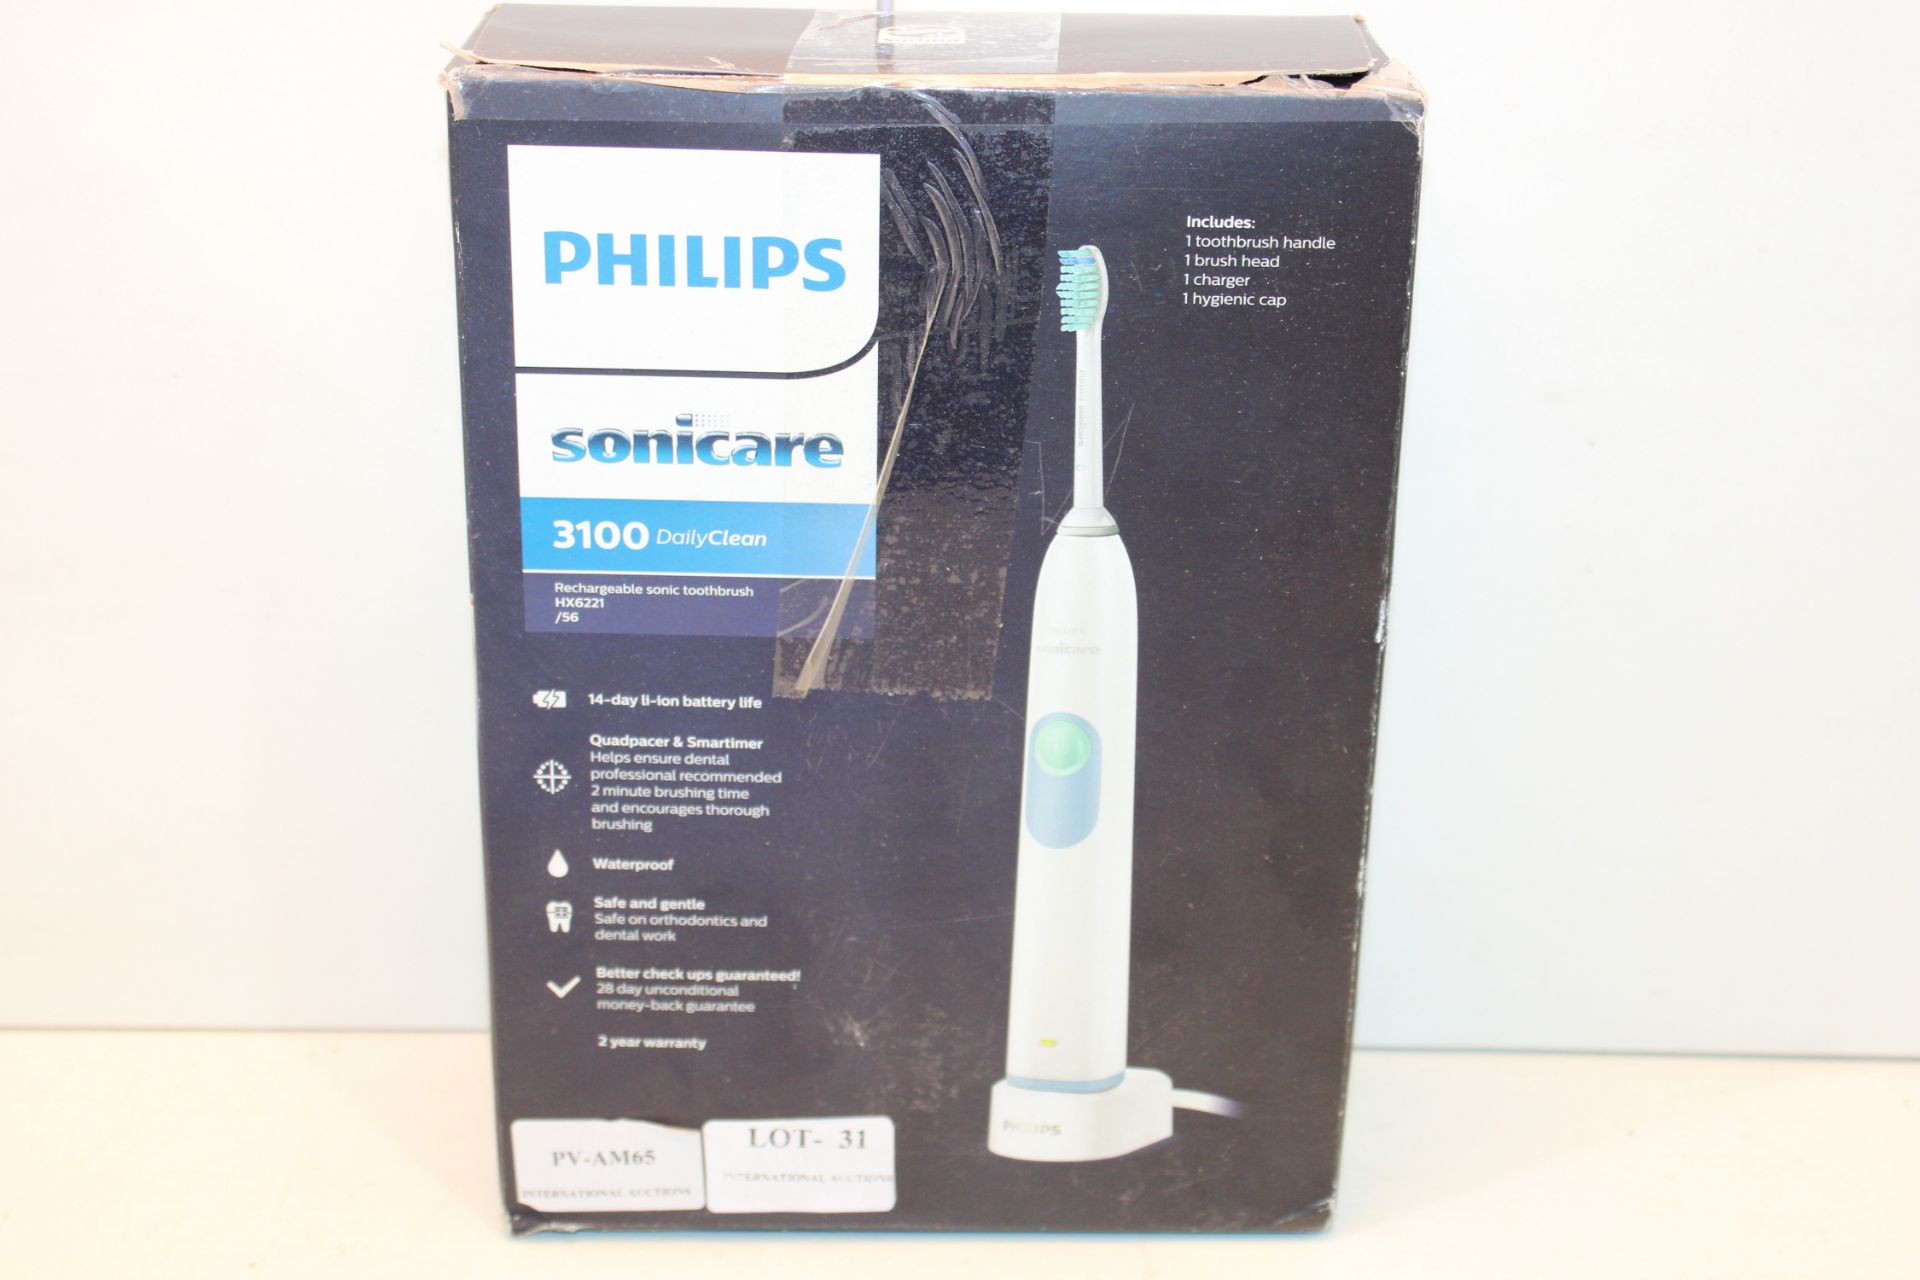 BOXED PHILIPS SONICARE 3100 DAILYCLEAN SONIC TOOTHBRUSH RRP £79.00Condition ReportAppraisal